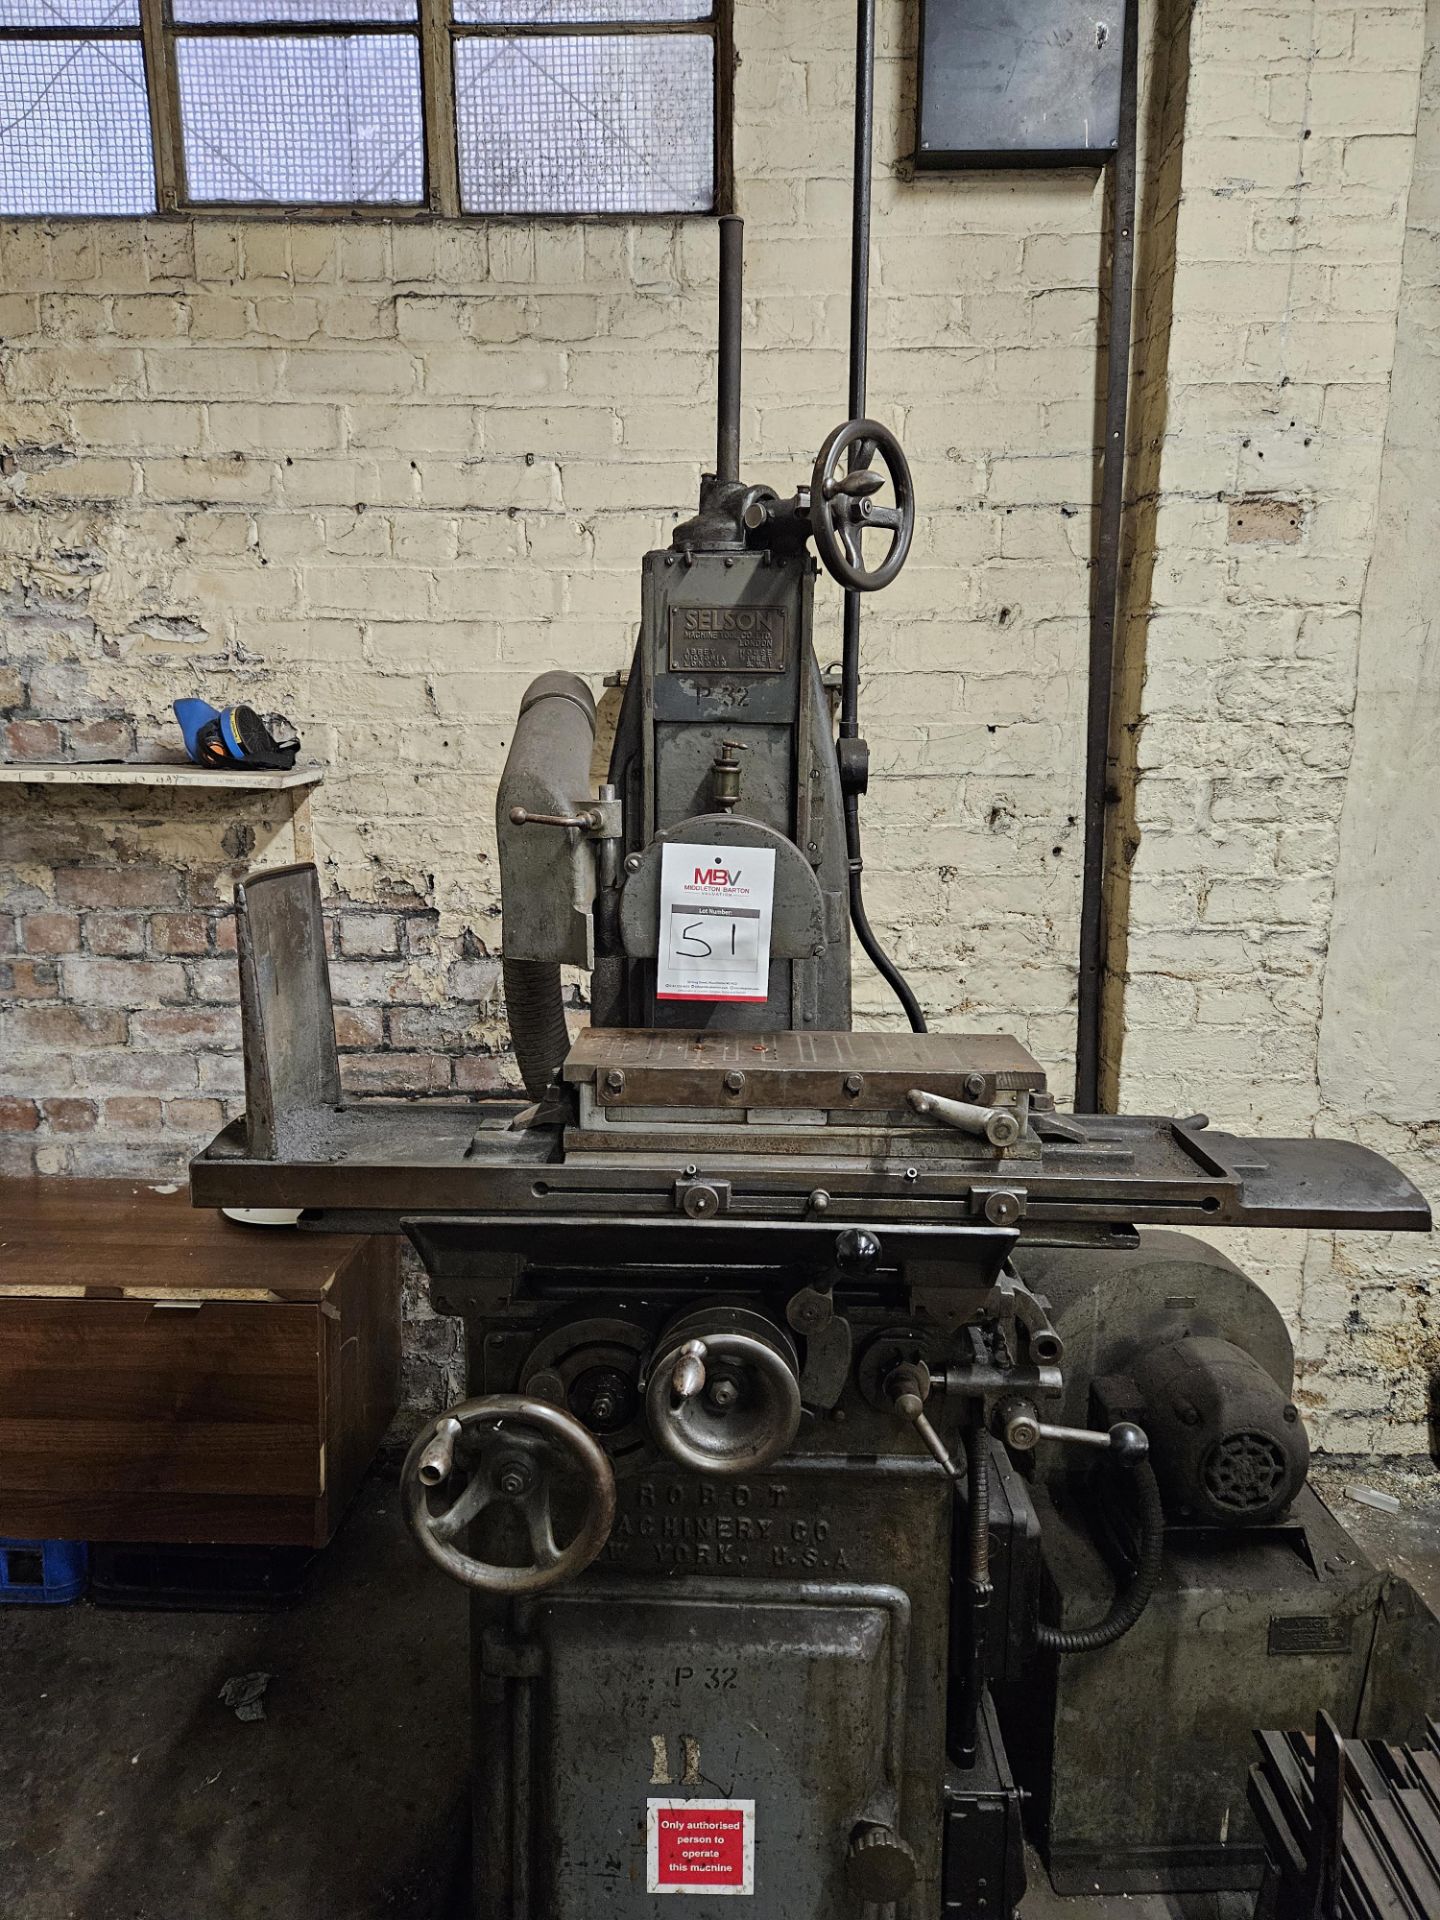 Selson Mfg Co 02/972 Surface Grinder